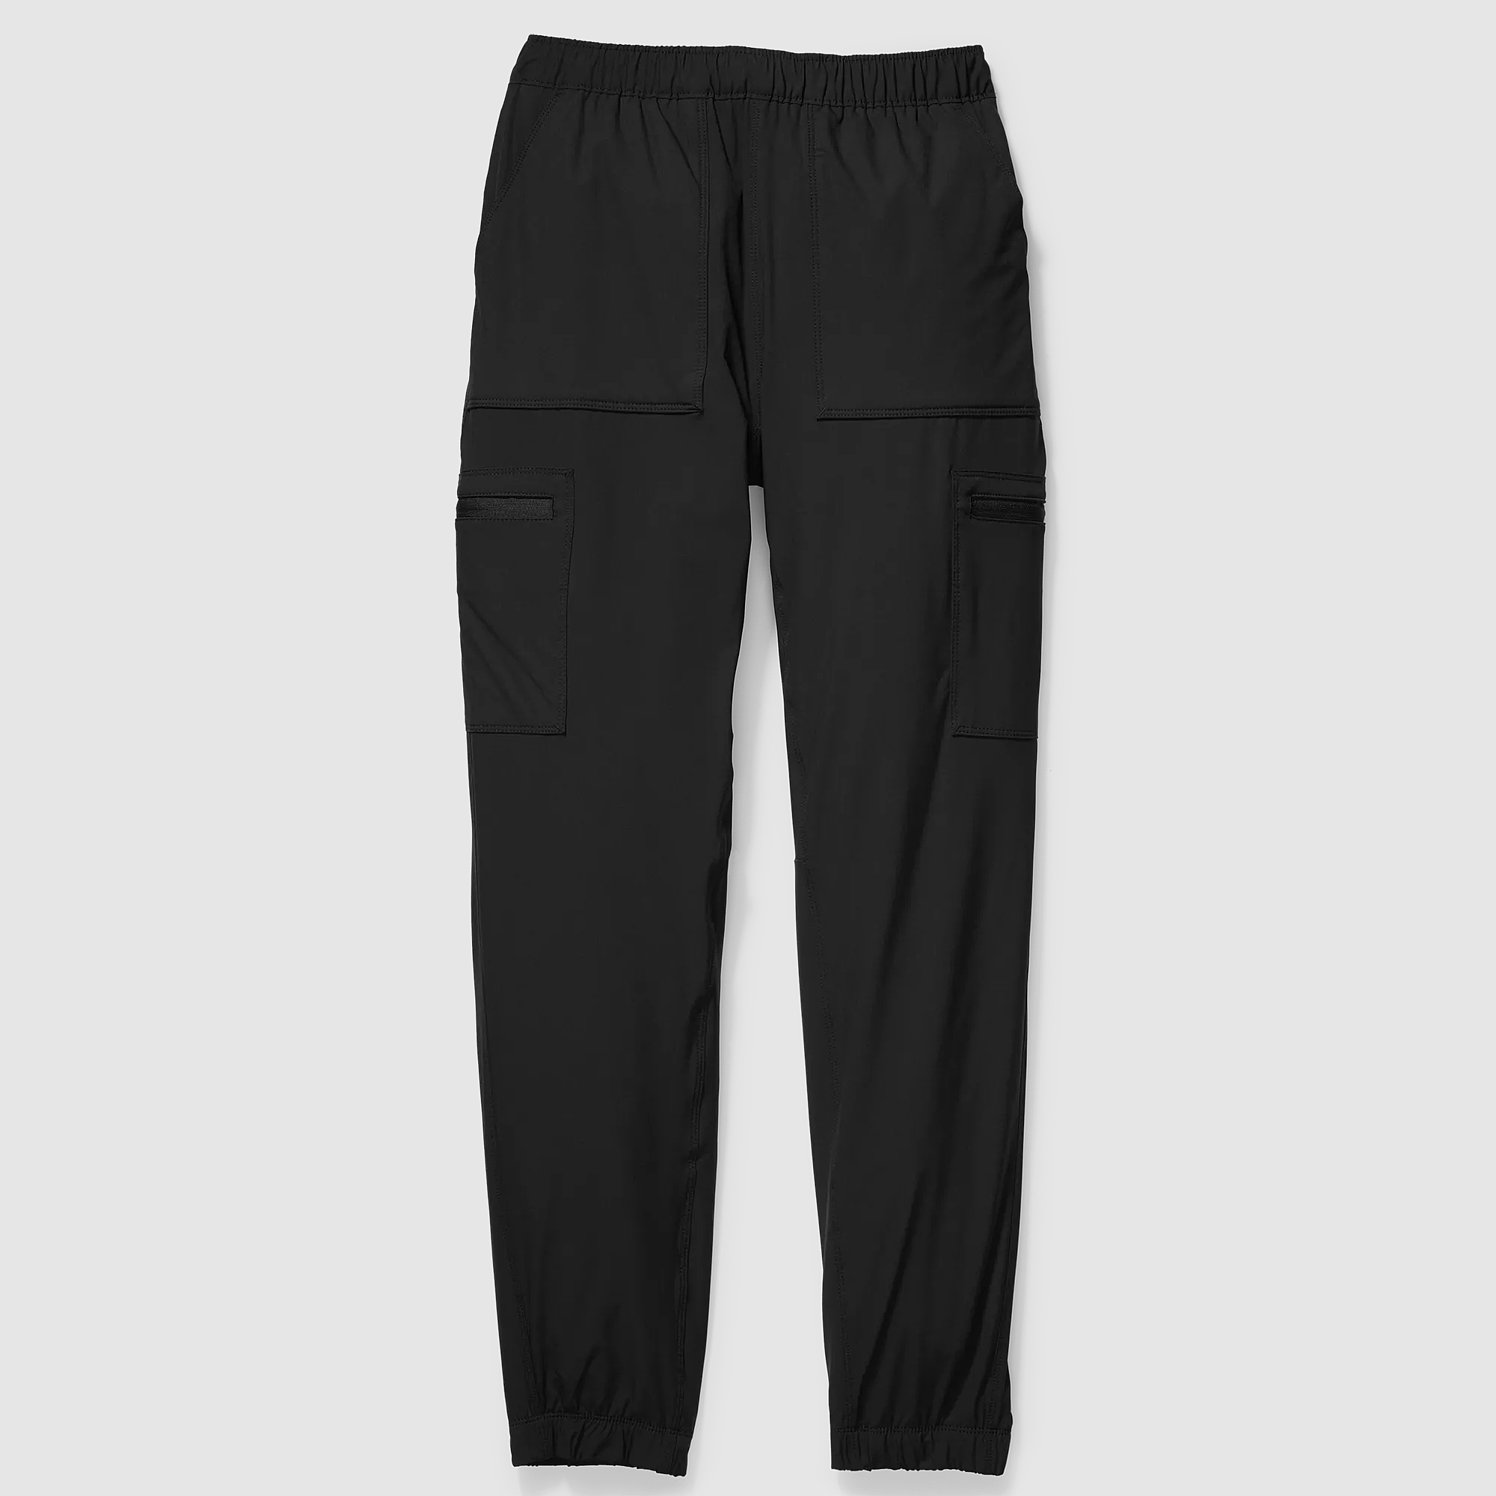 NEW Eddie Bauer Womens Fleeced Lined Pants Black Size 10